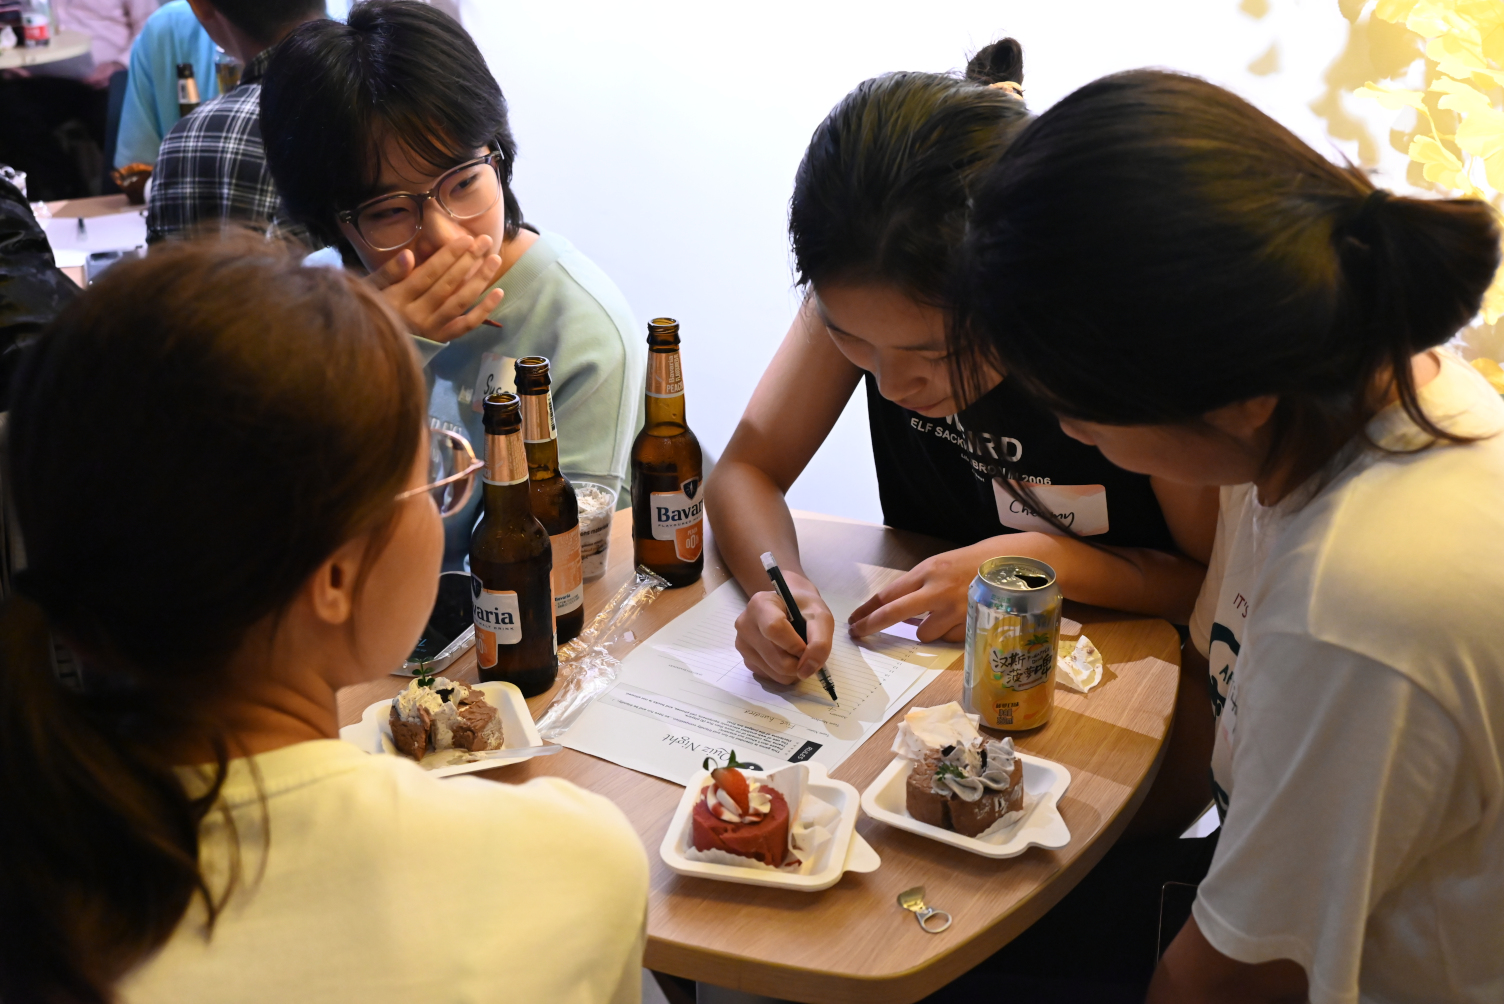 A team of female players enjoy playing the pub quiz at Hainan's Halloween event